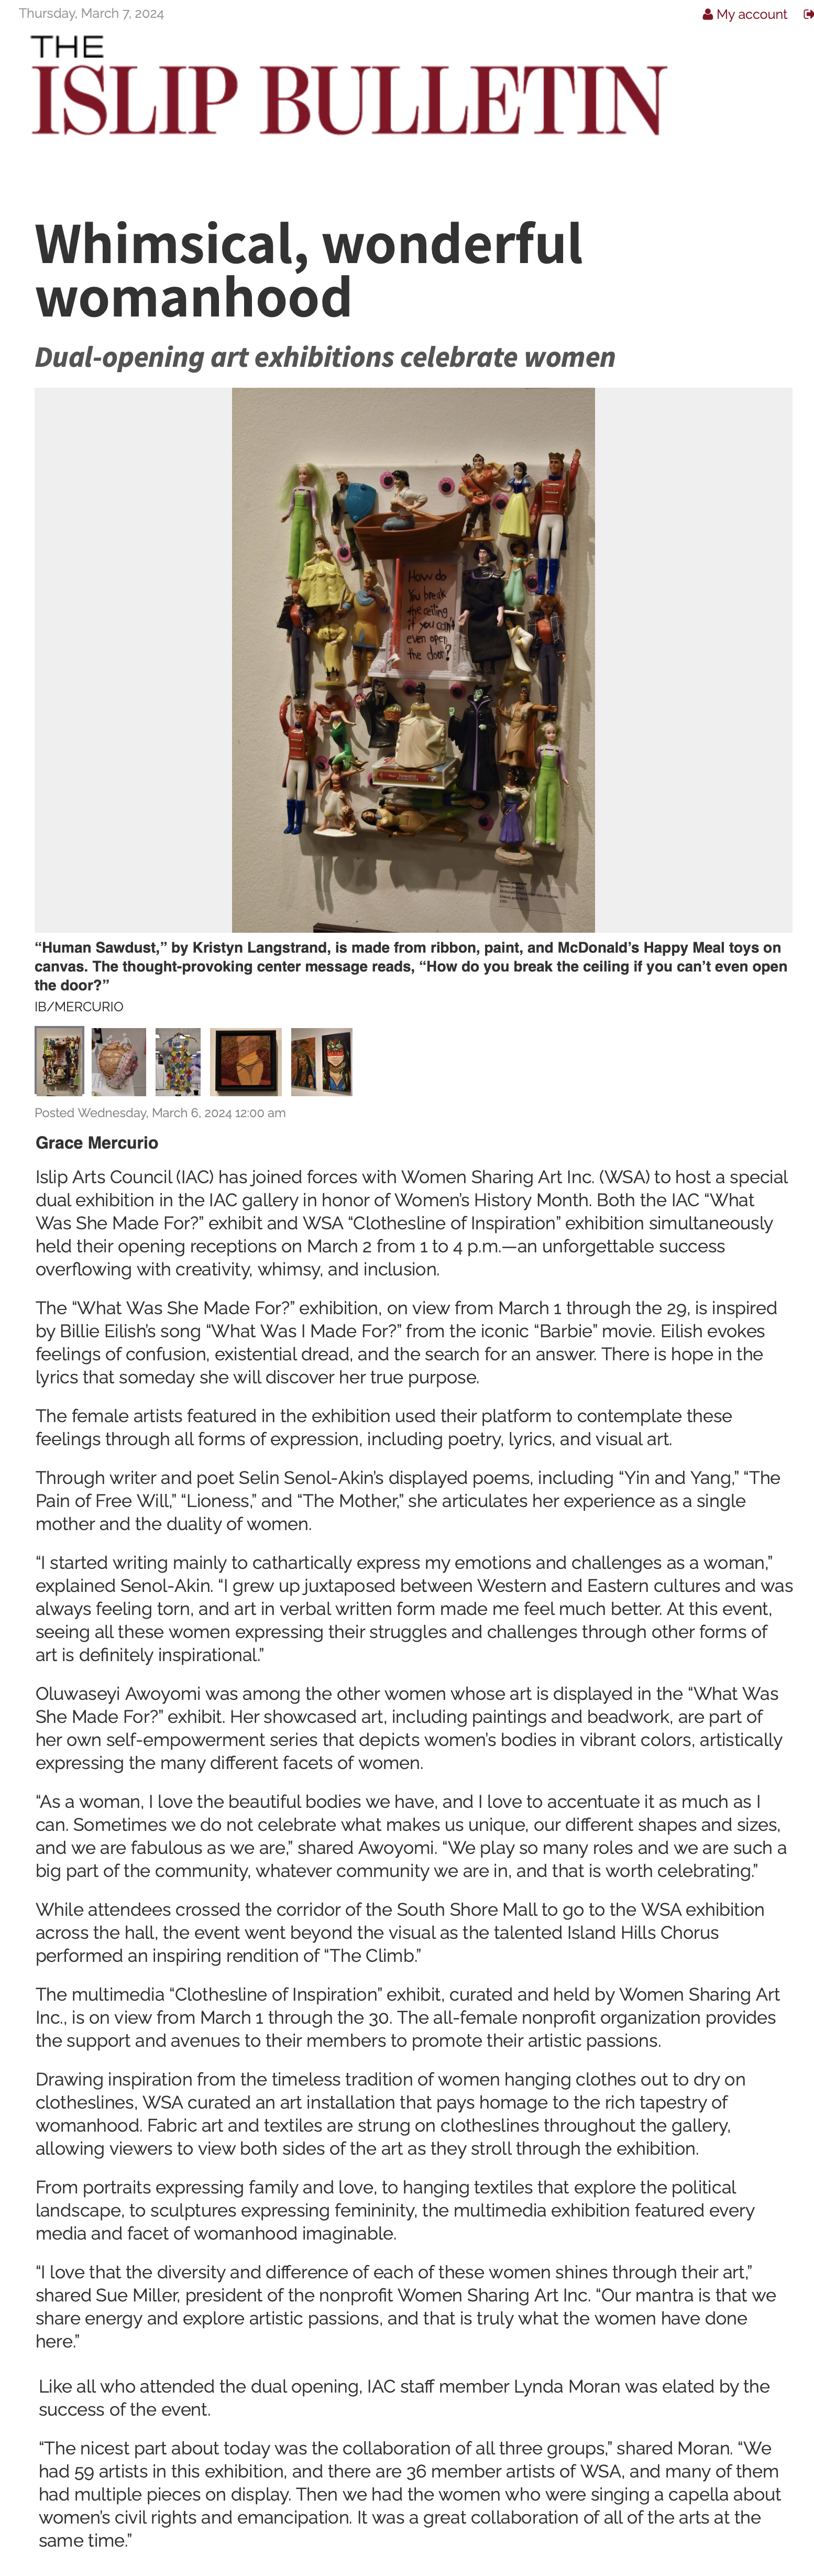  MAR 2024 / Women's History Month Exhibitions Featured in Islip Bulletin